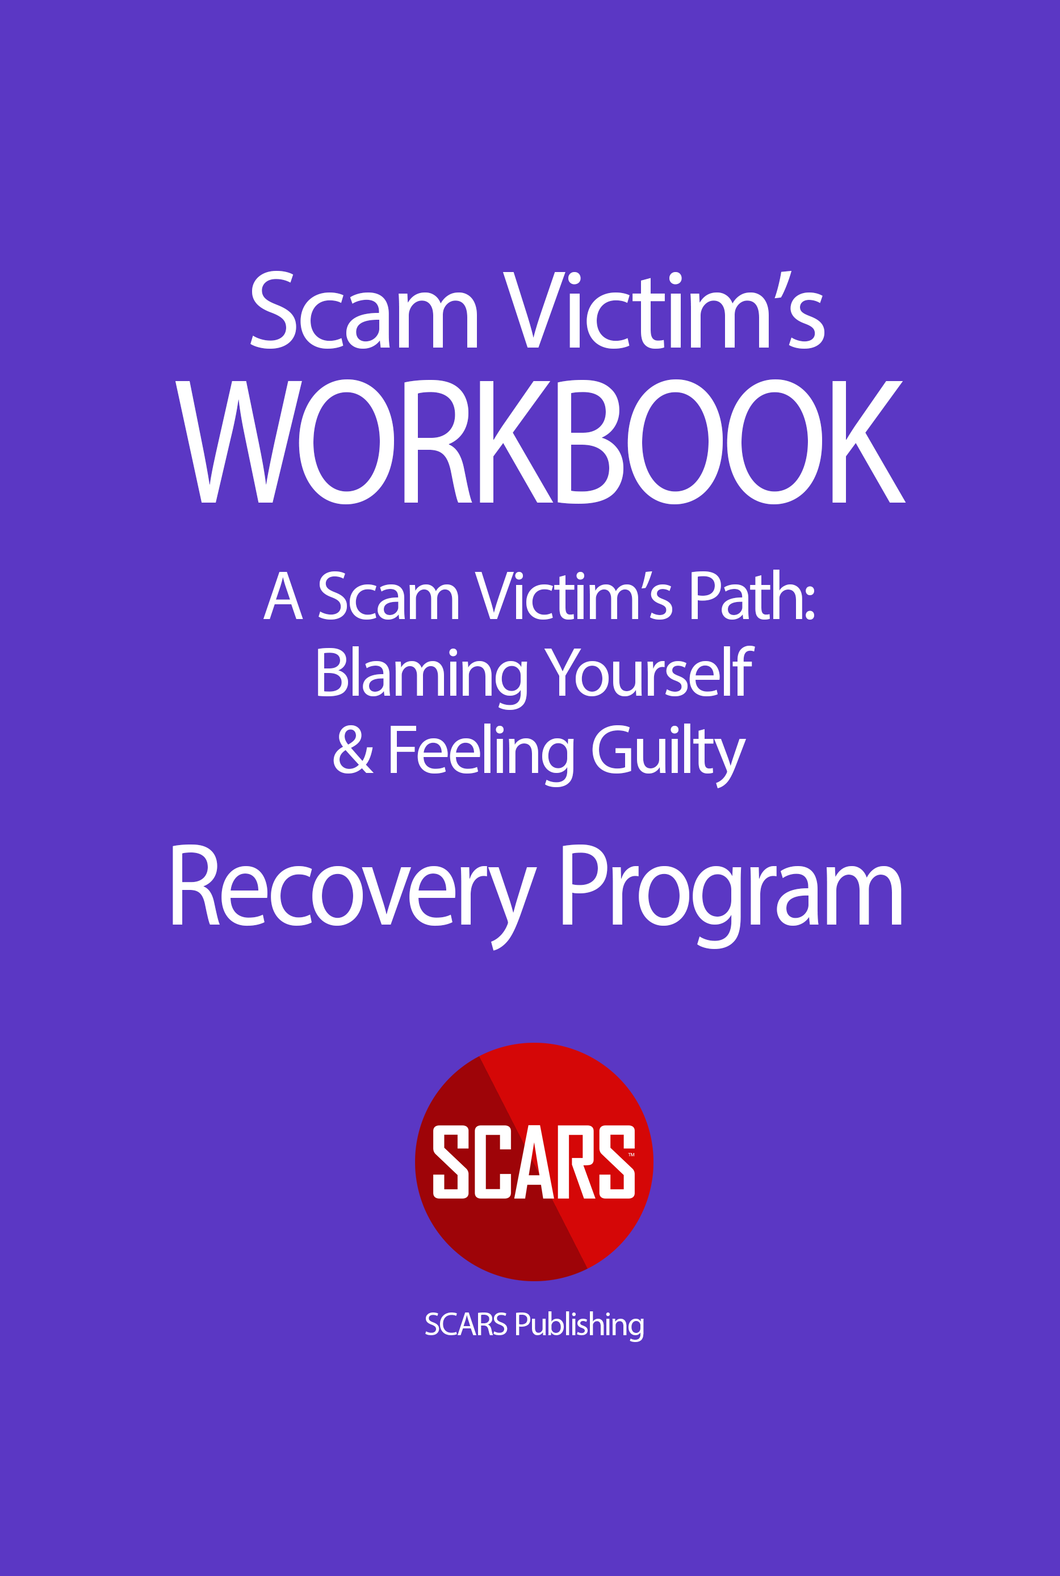 SCARS WORKBOOK - Blaming Yourself & Feeling Guilty - a Part of the SCARS Recovery Program